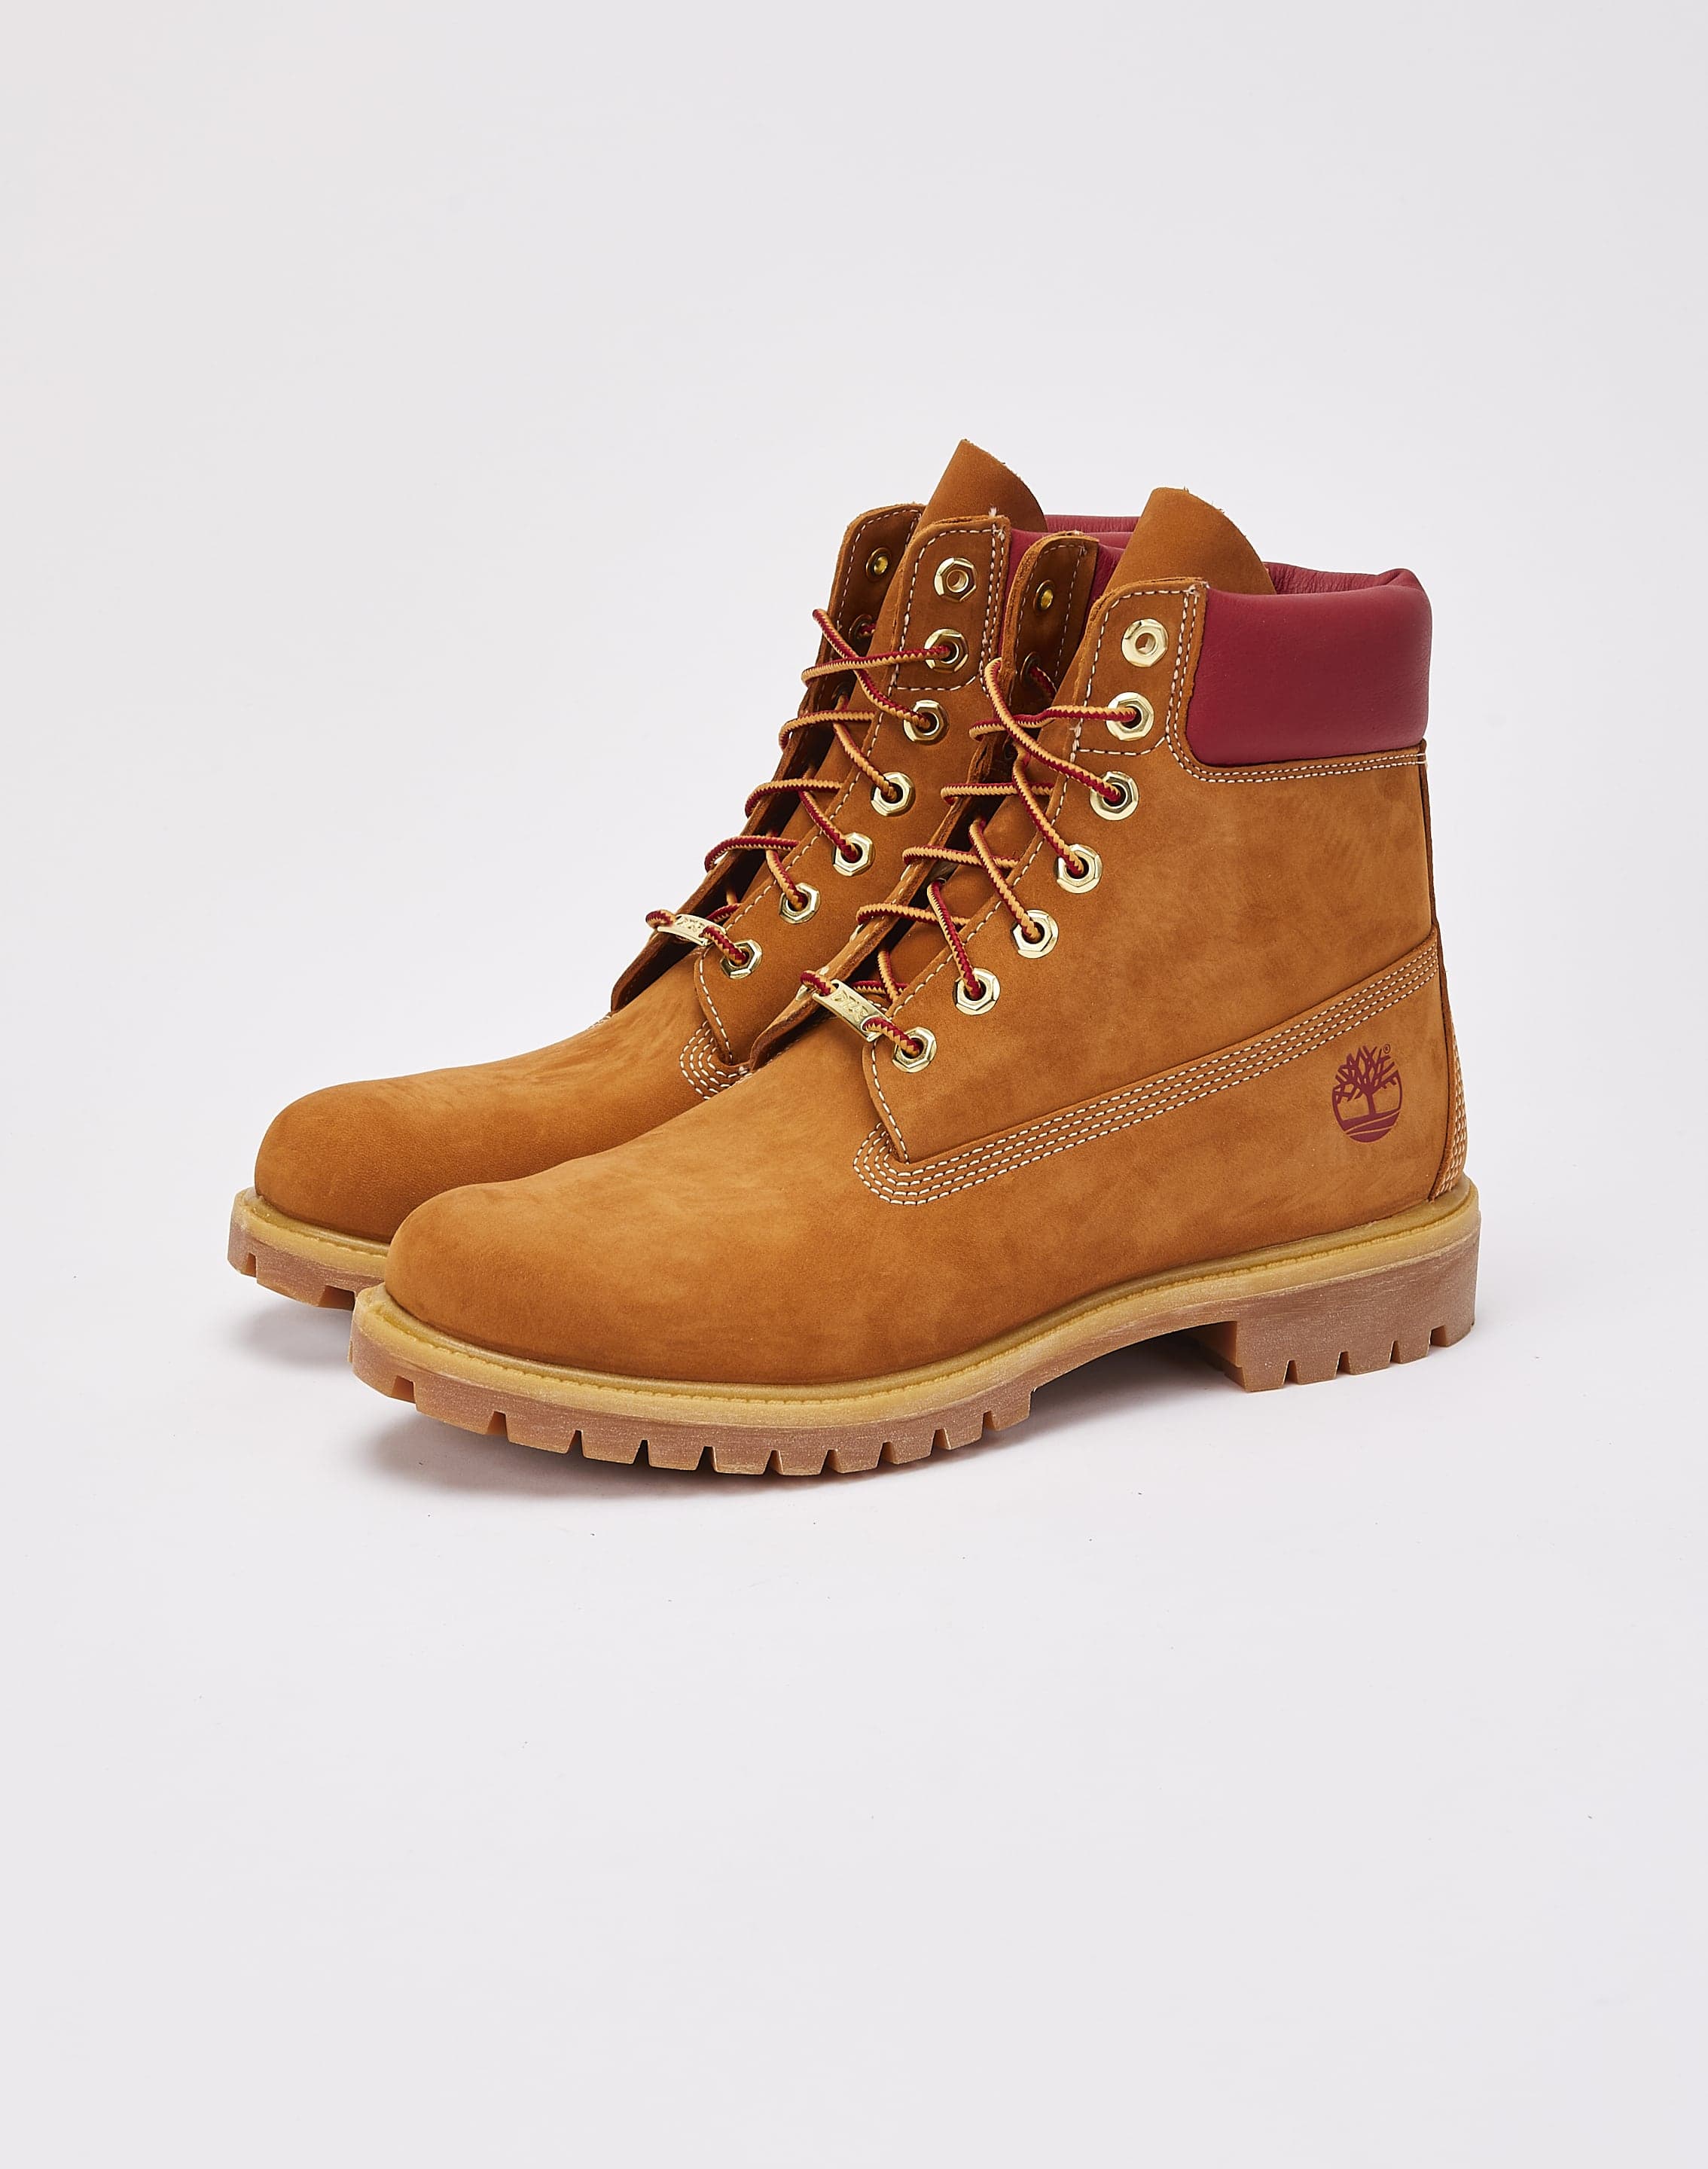 6-Inch Premium Boots 'Red Tops' DTLR